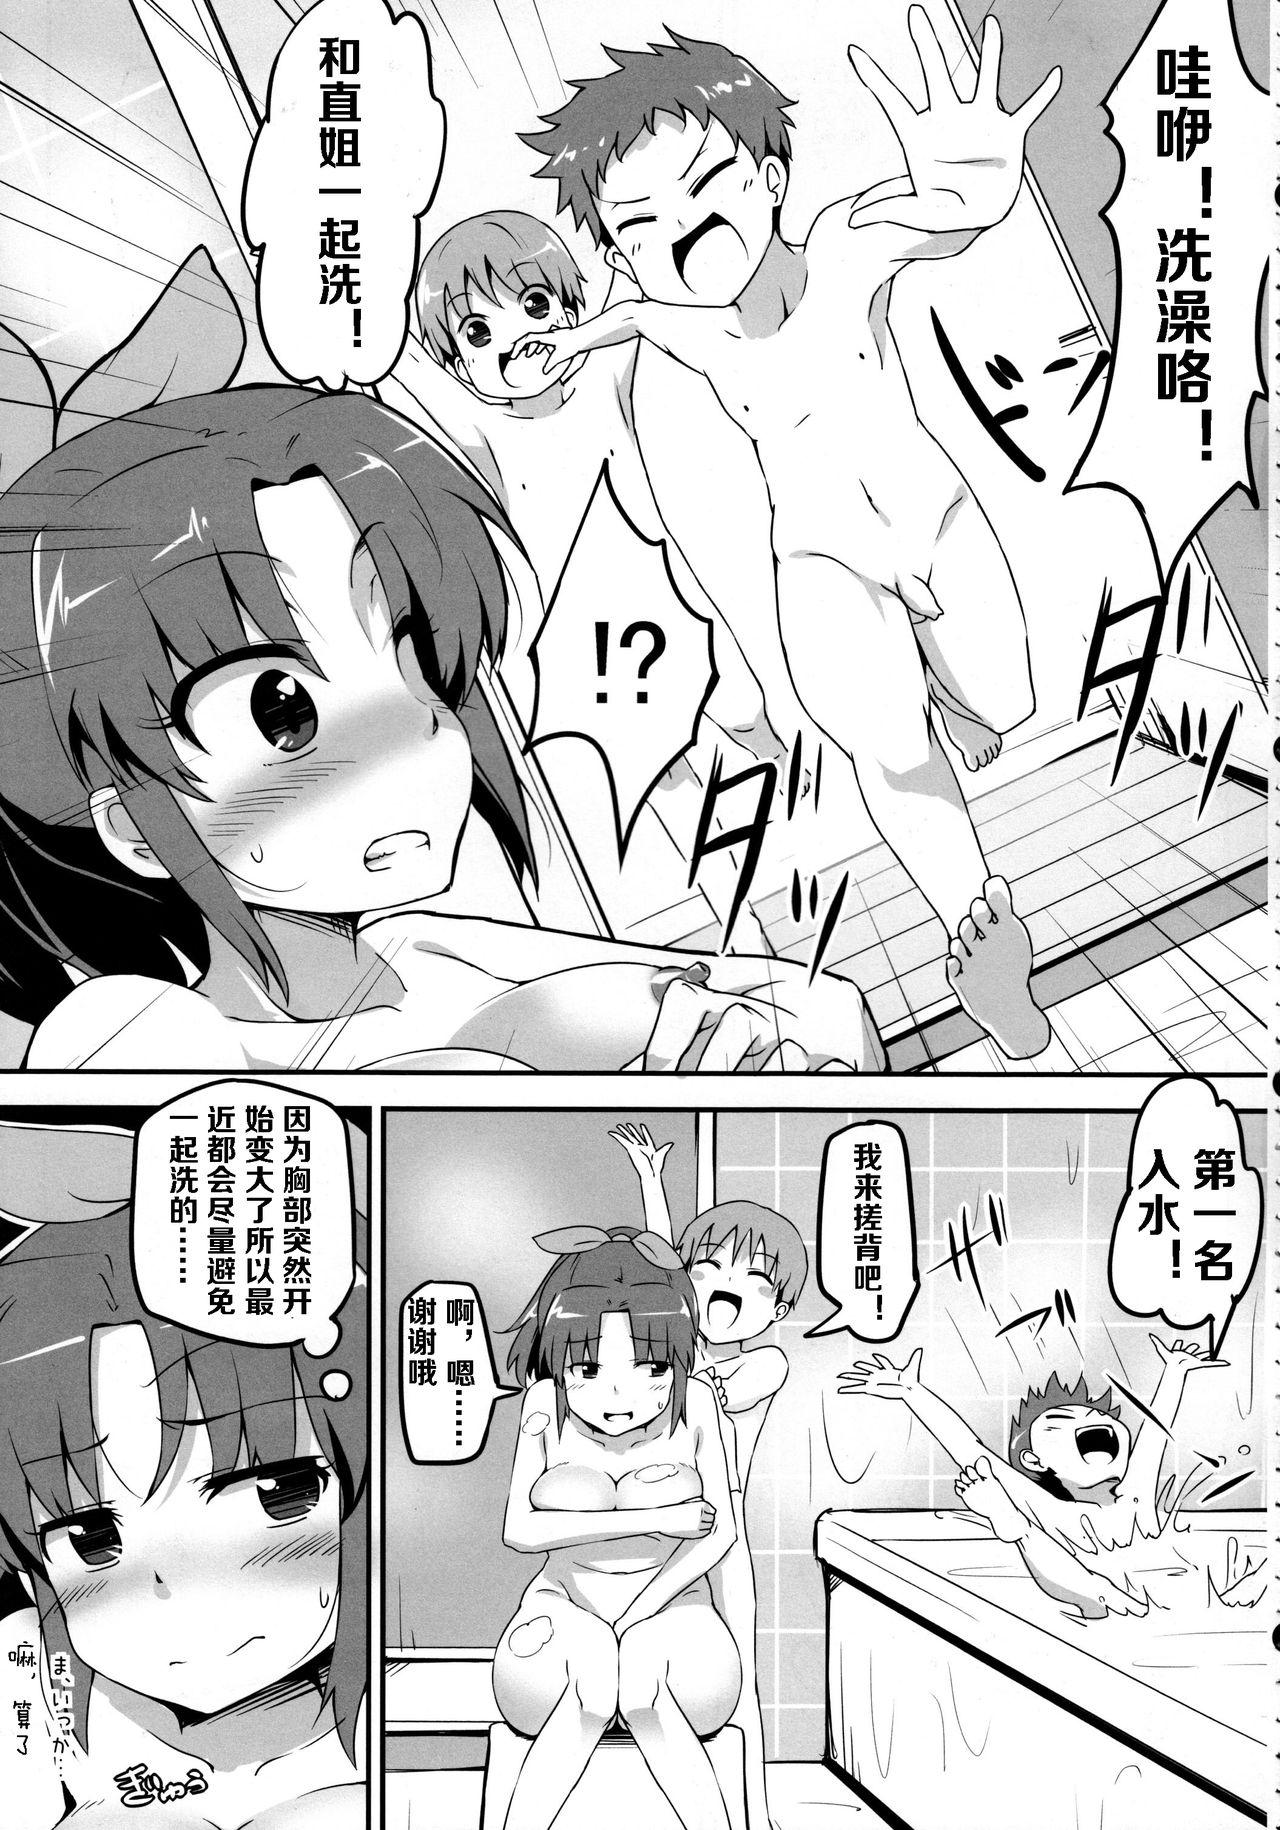 Bald Pussy Nao no Onee-chan Jijou - Smile precure Asian - Page 5